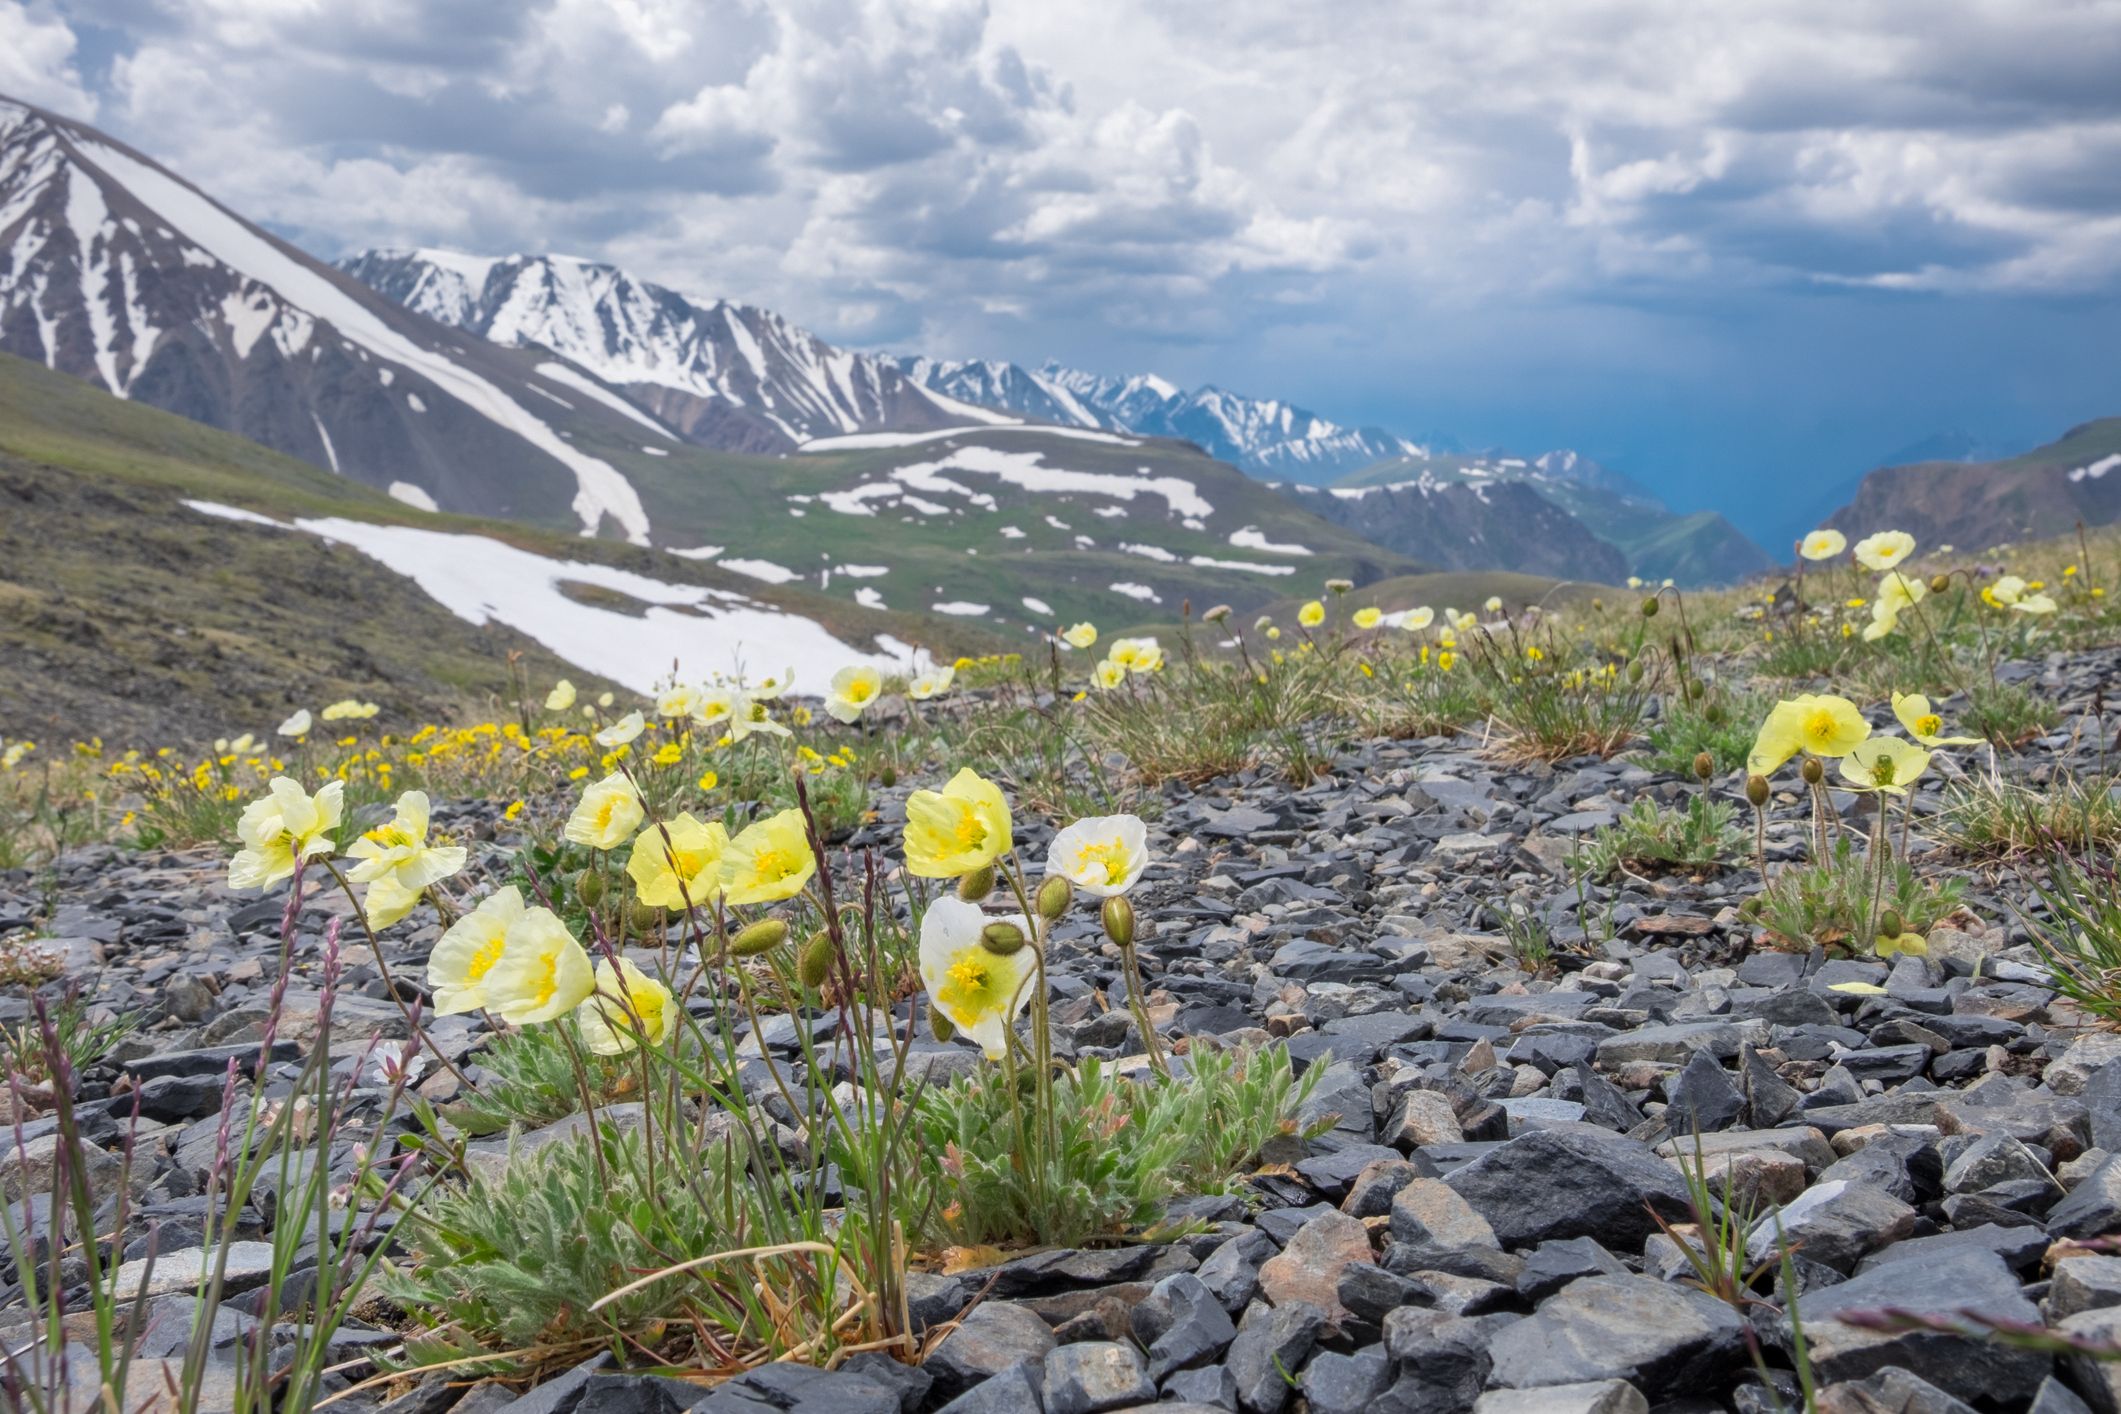 Climate Change Is Pushing Plants Into Arctic, Disrupting Tundra Ecosystems